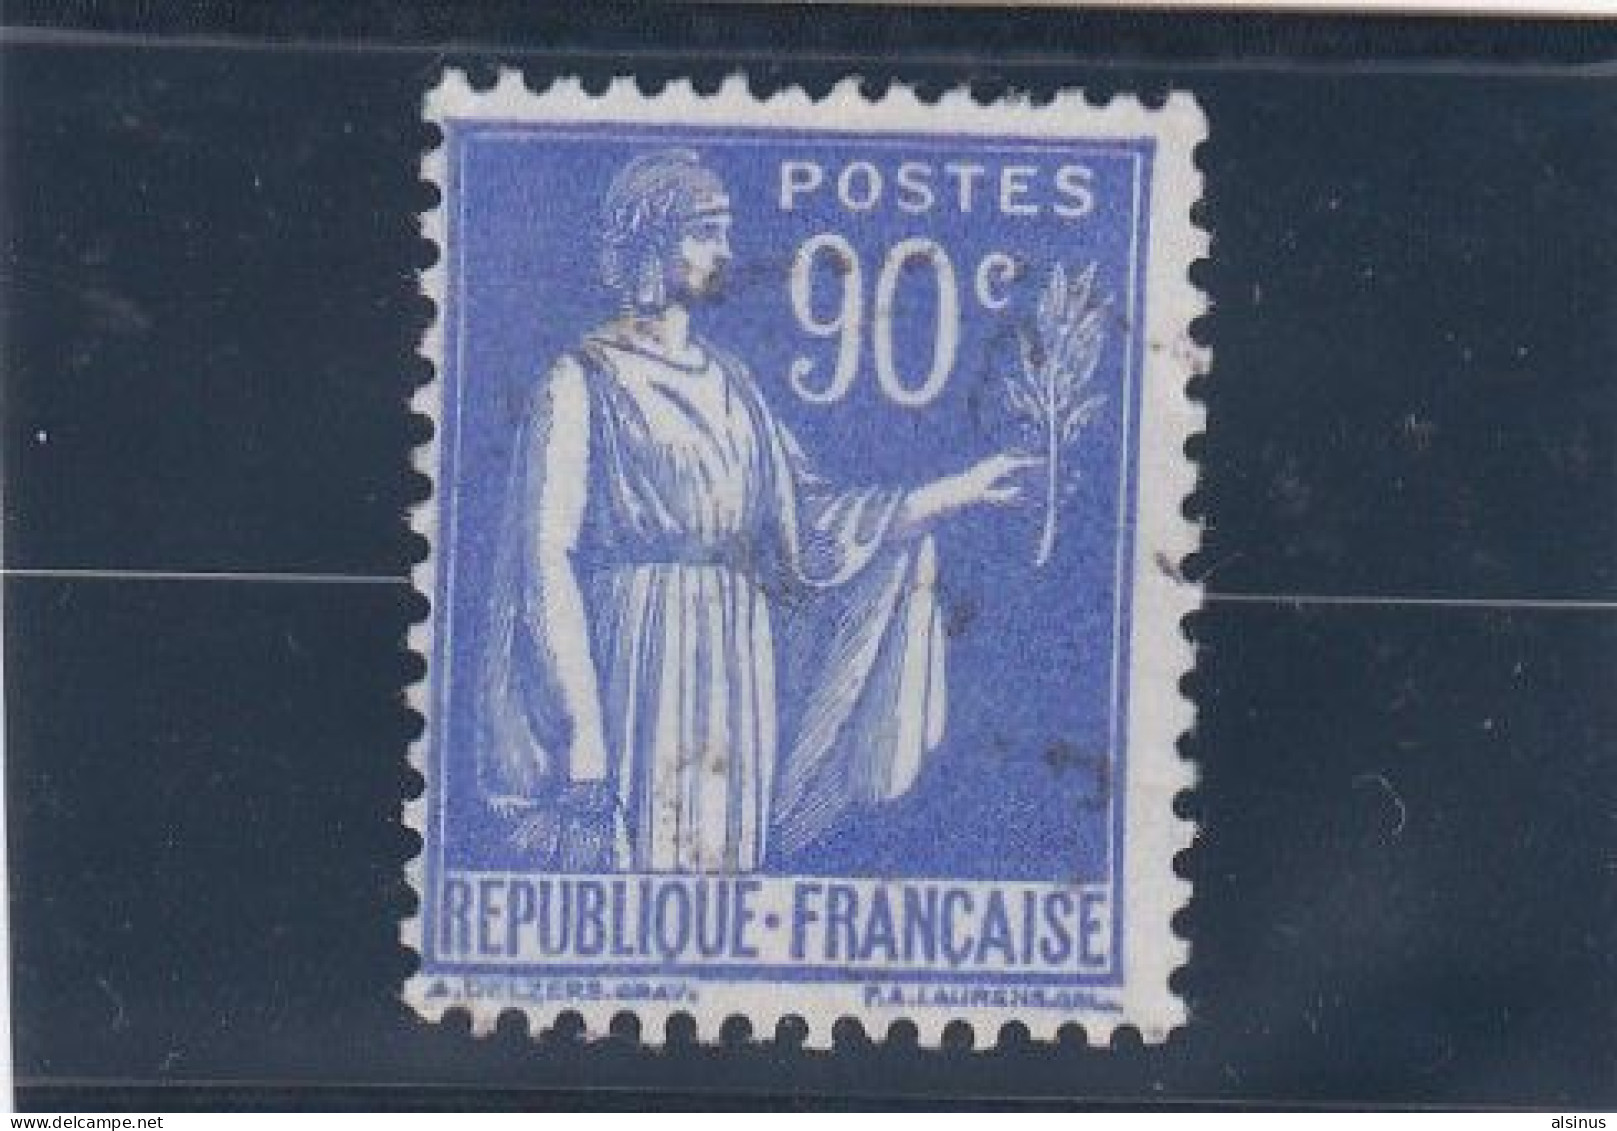 FRANCE - TYPE PAIX - N° 368b - 90 C OUTREMER - TYPE II - NEUF SANS GOMME - 1932-39 Vrede